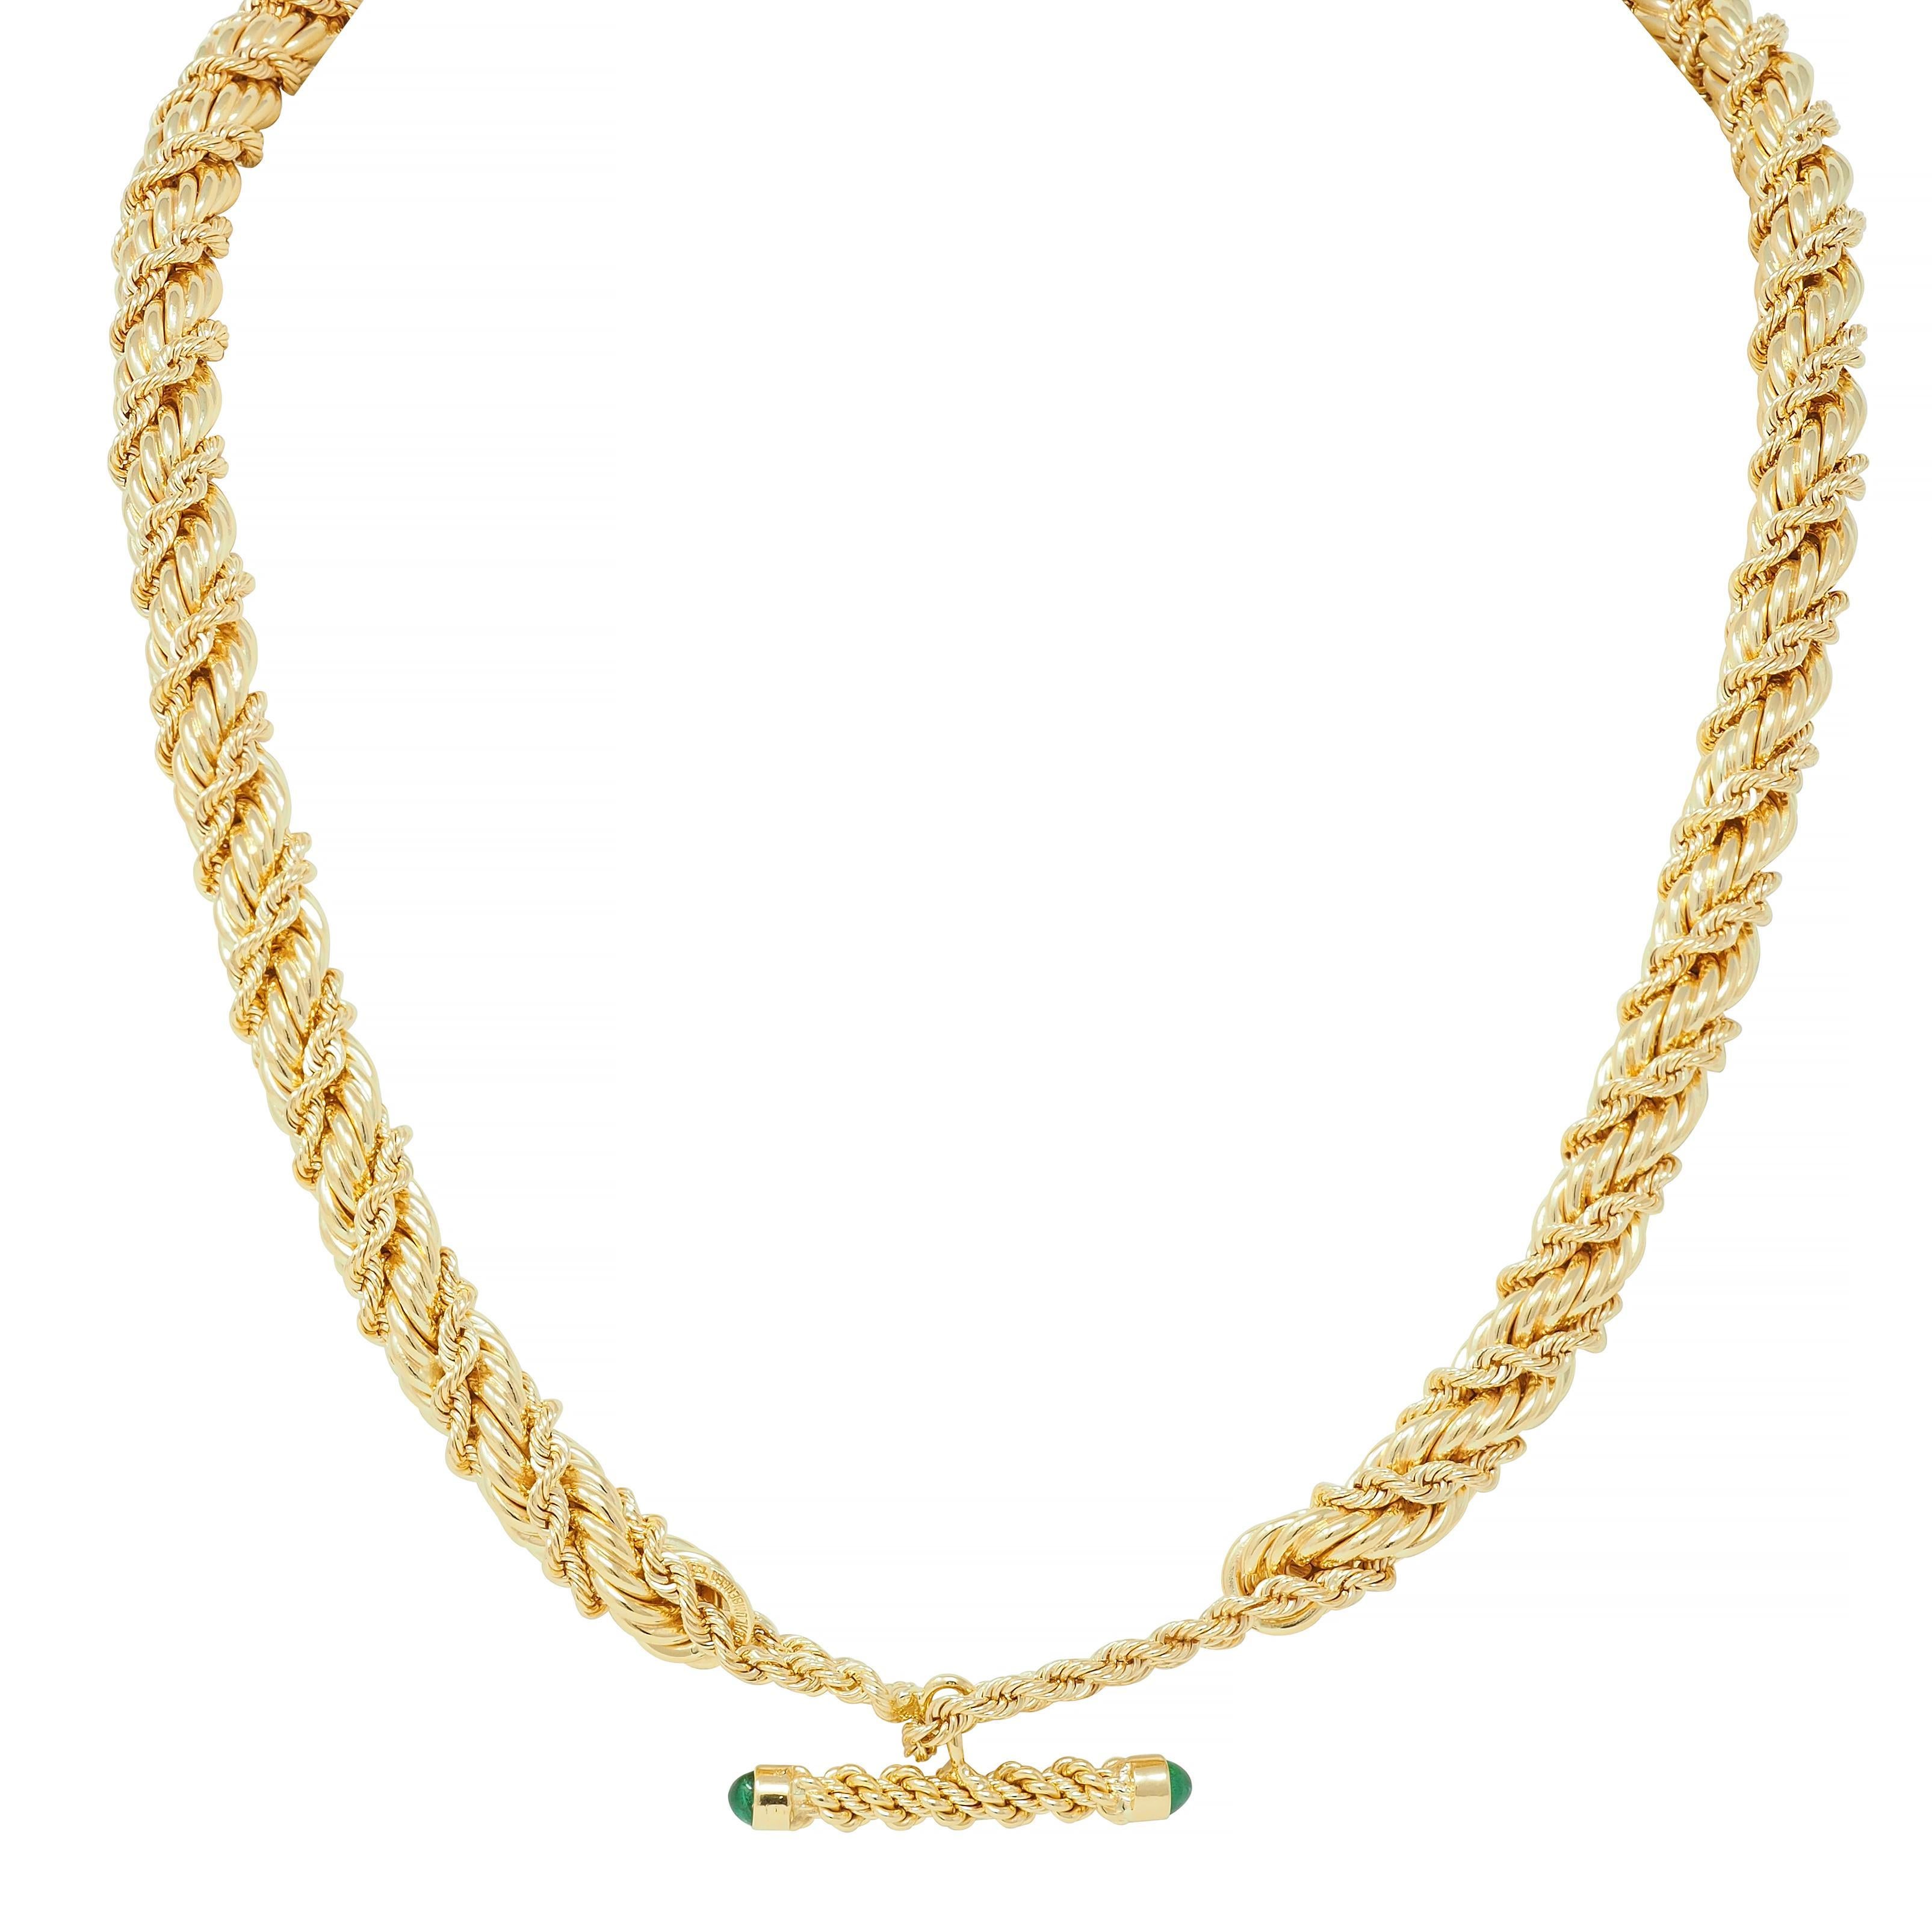 Schlumberger Tiffany & Co. Emerald 18 Karat Gold Twisted Rope Vintage Necklace In Excellent Condition For Sale In Philadelphia, PA